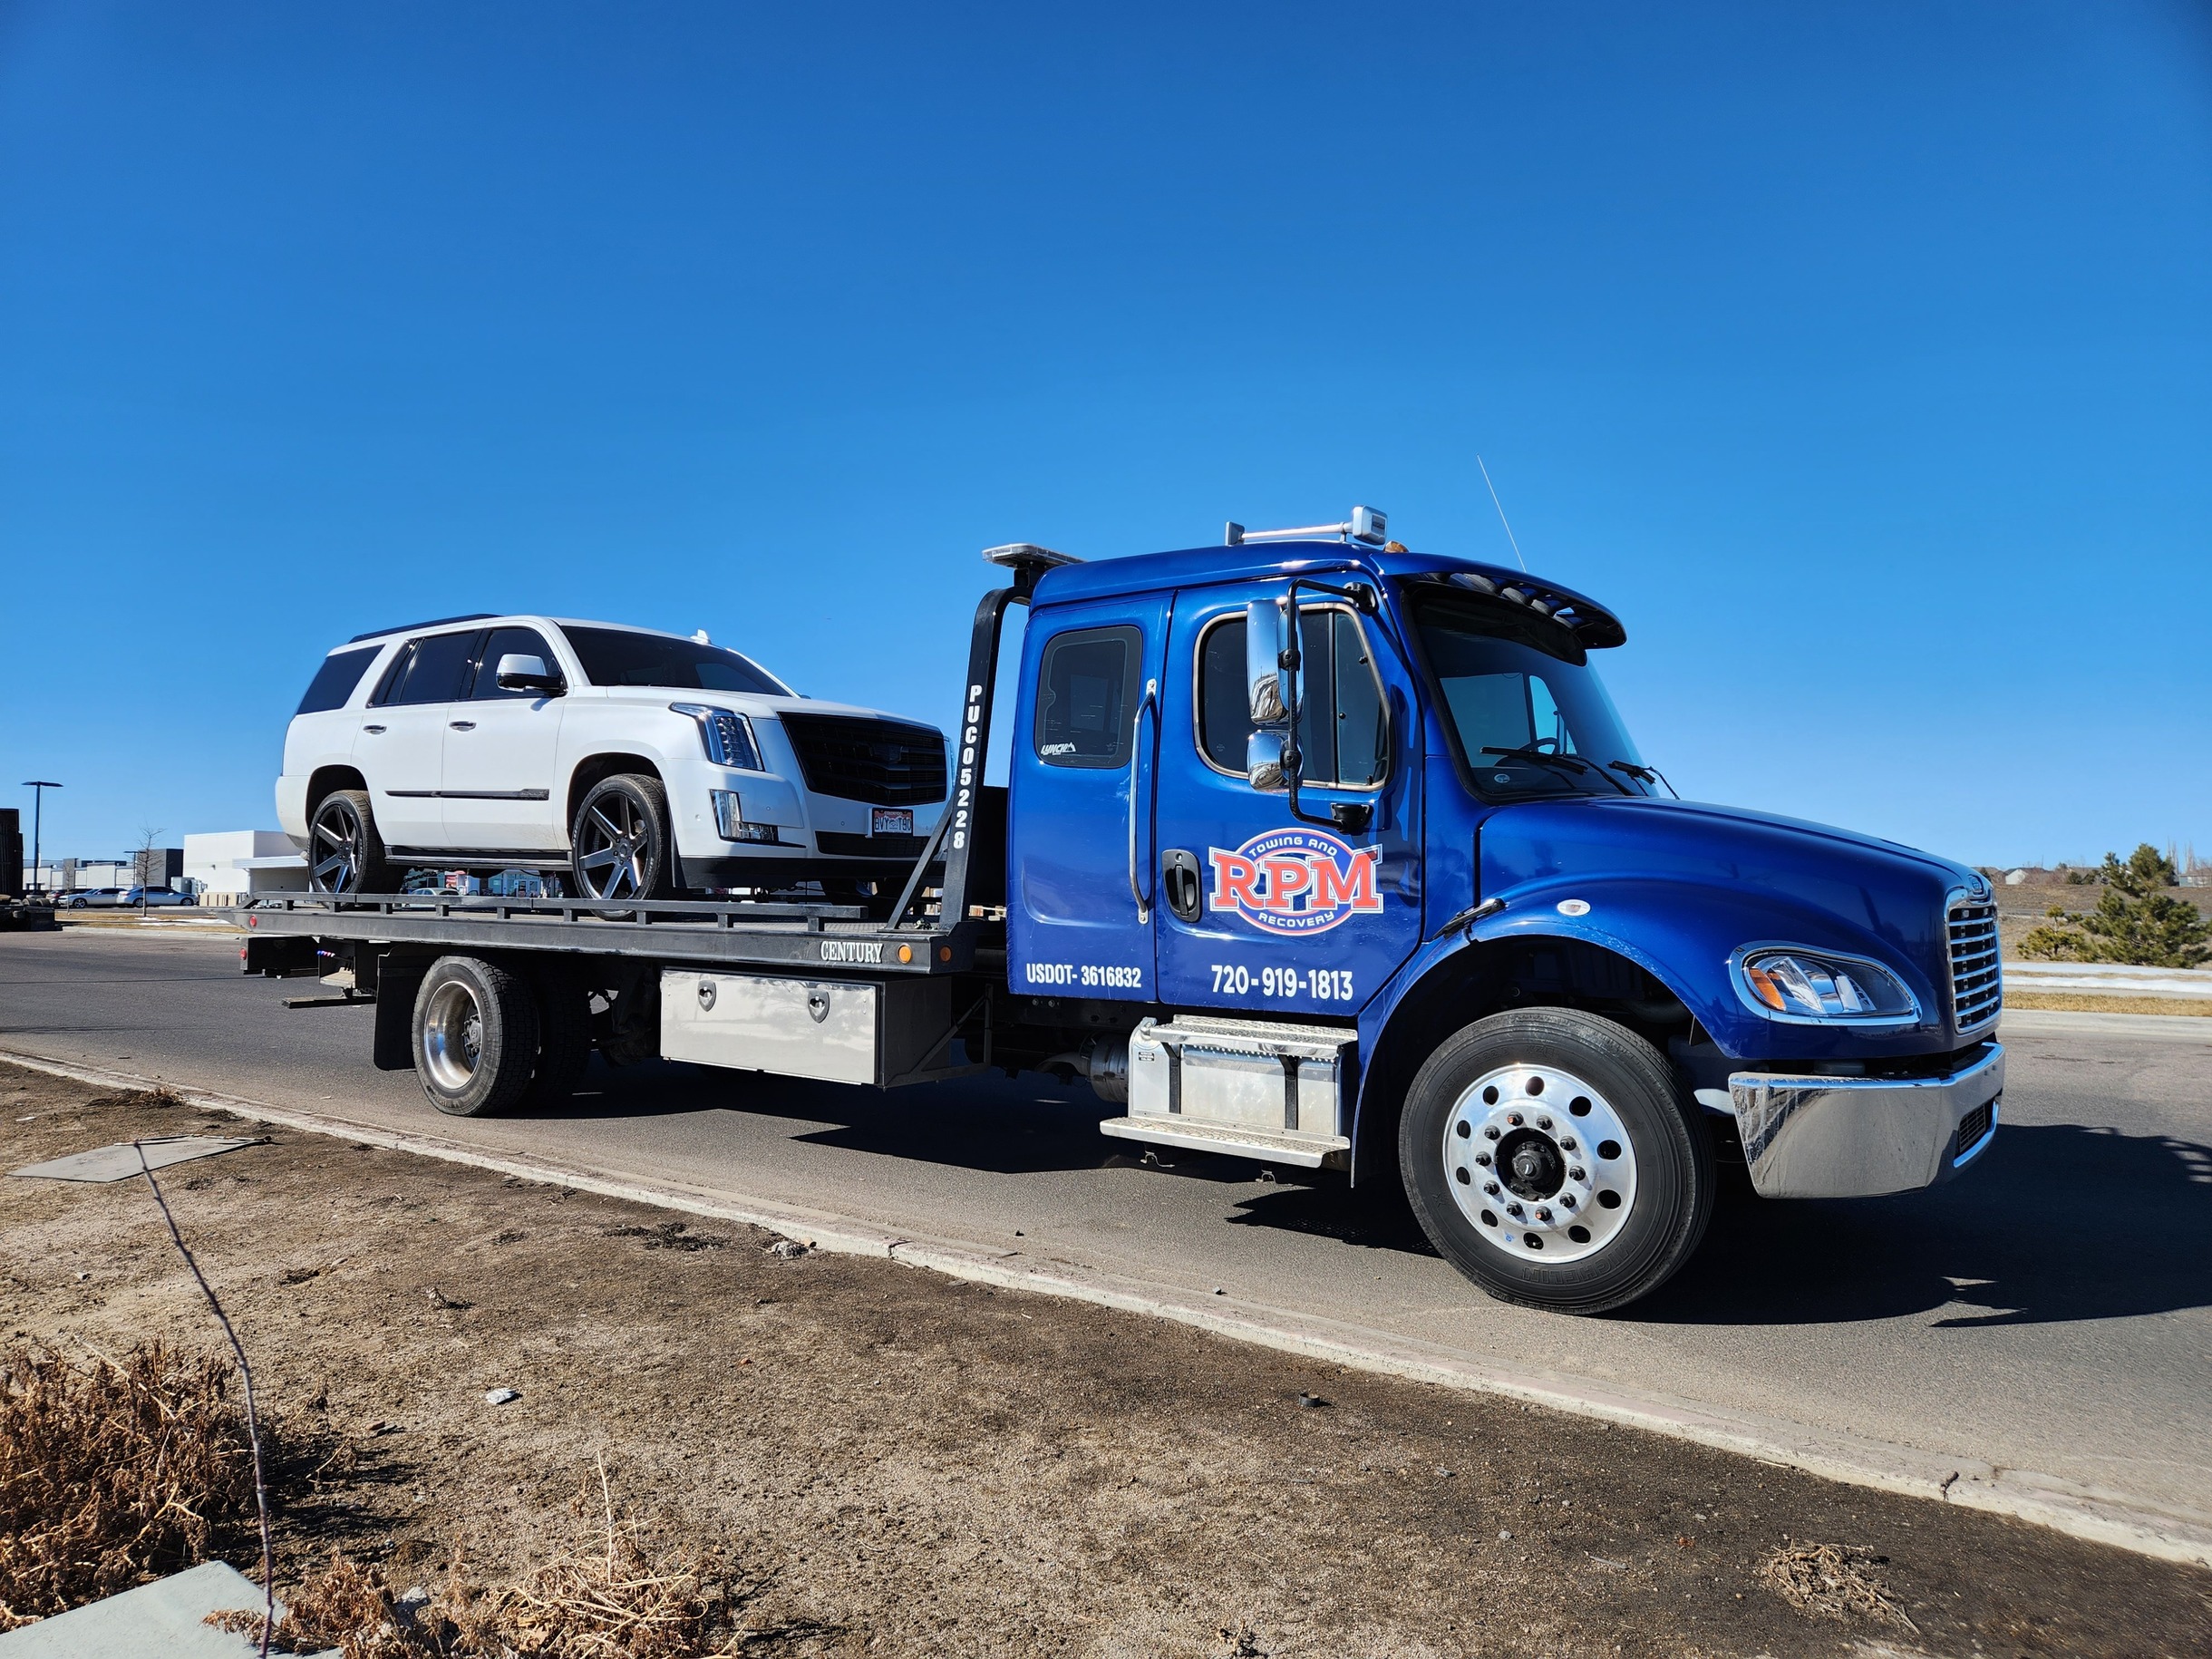 this image shows towing services in Commerce City, CO